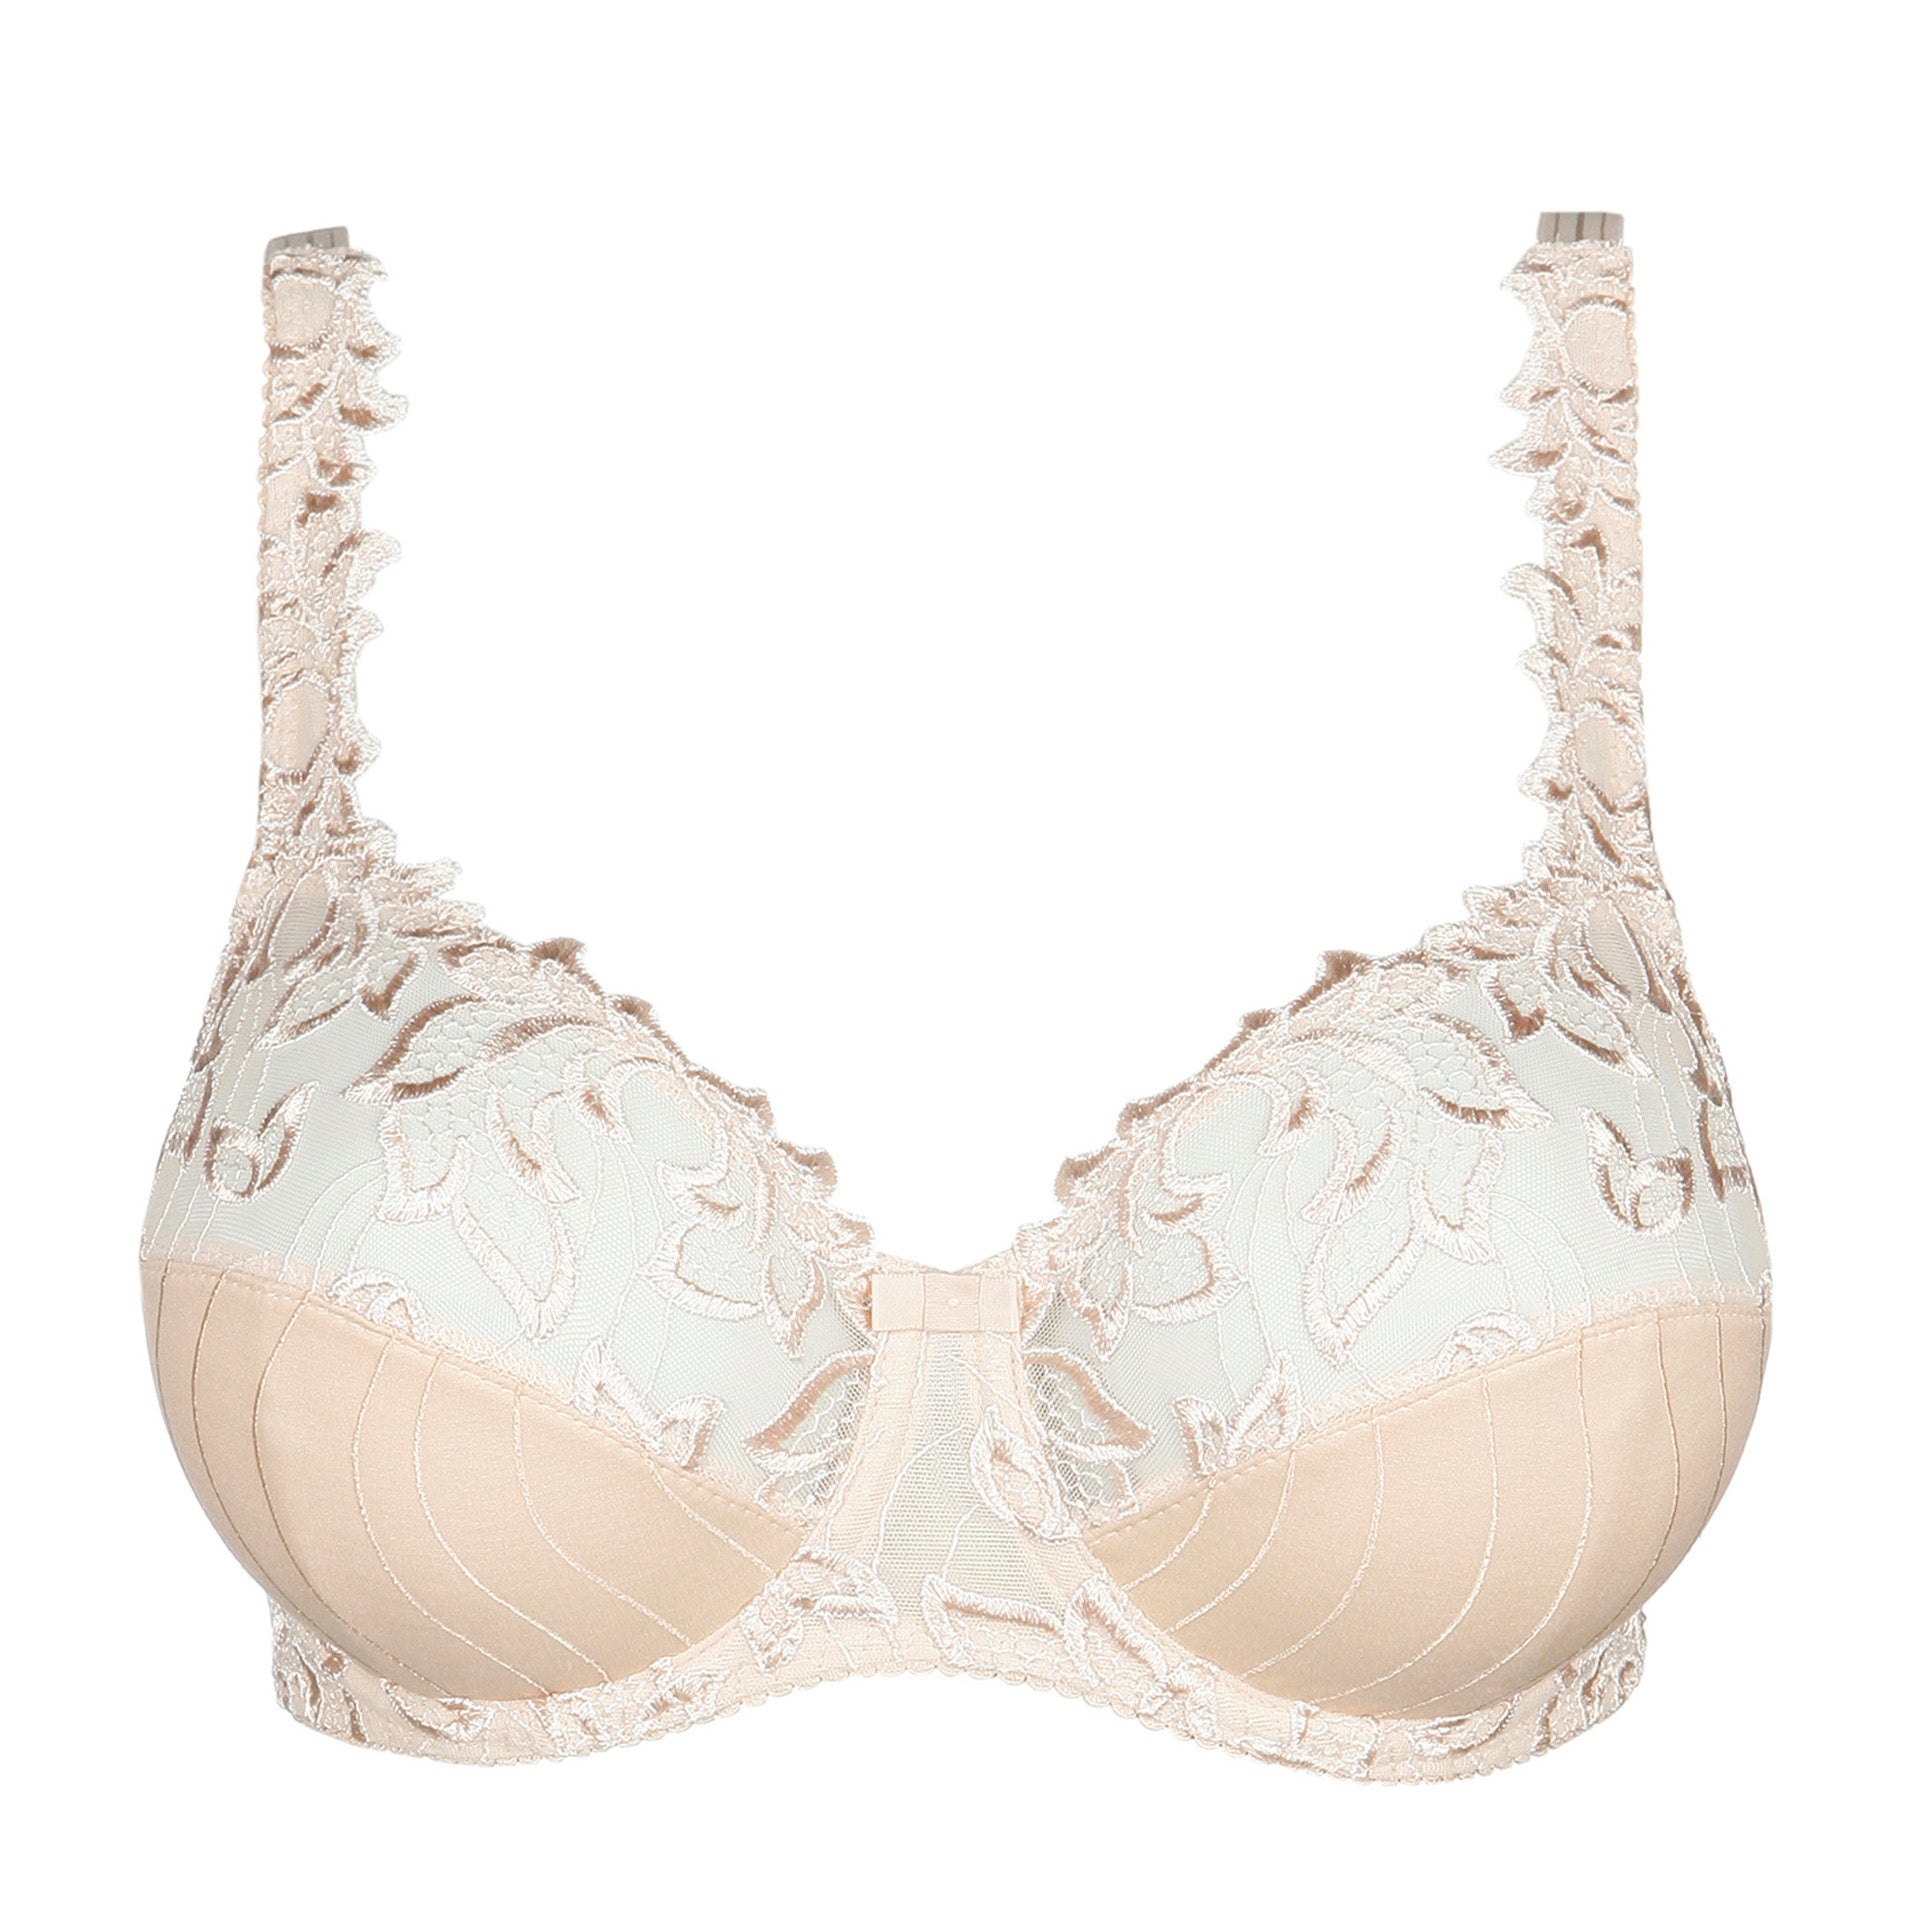 Supportive bra for large breasts, Deauville full cup underwire bra in nude by PrimaDanna.